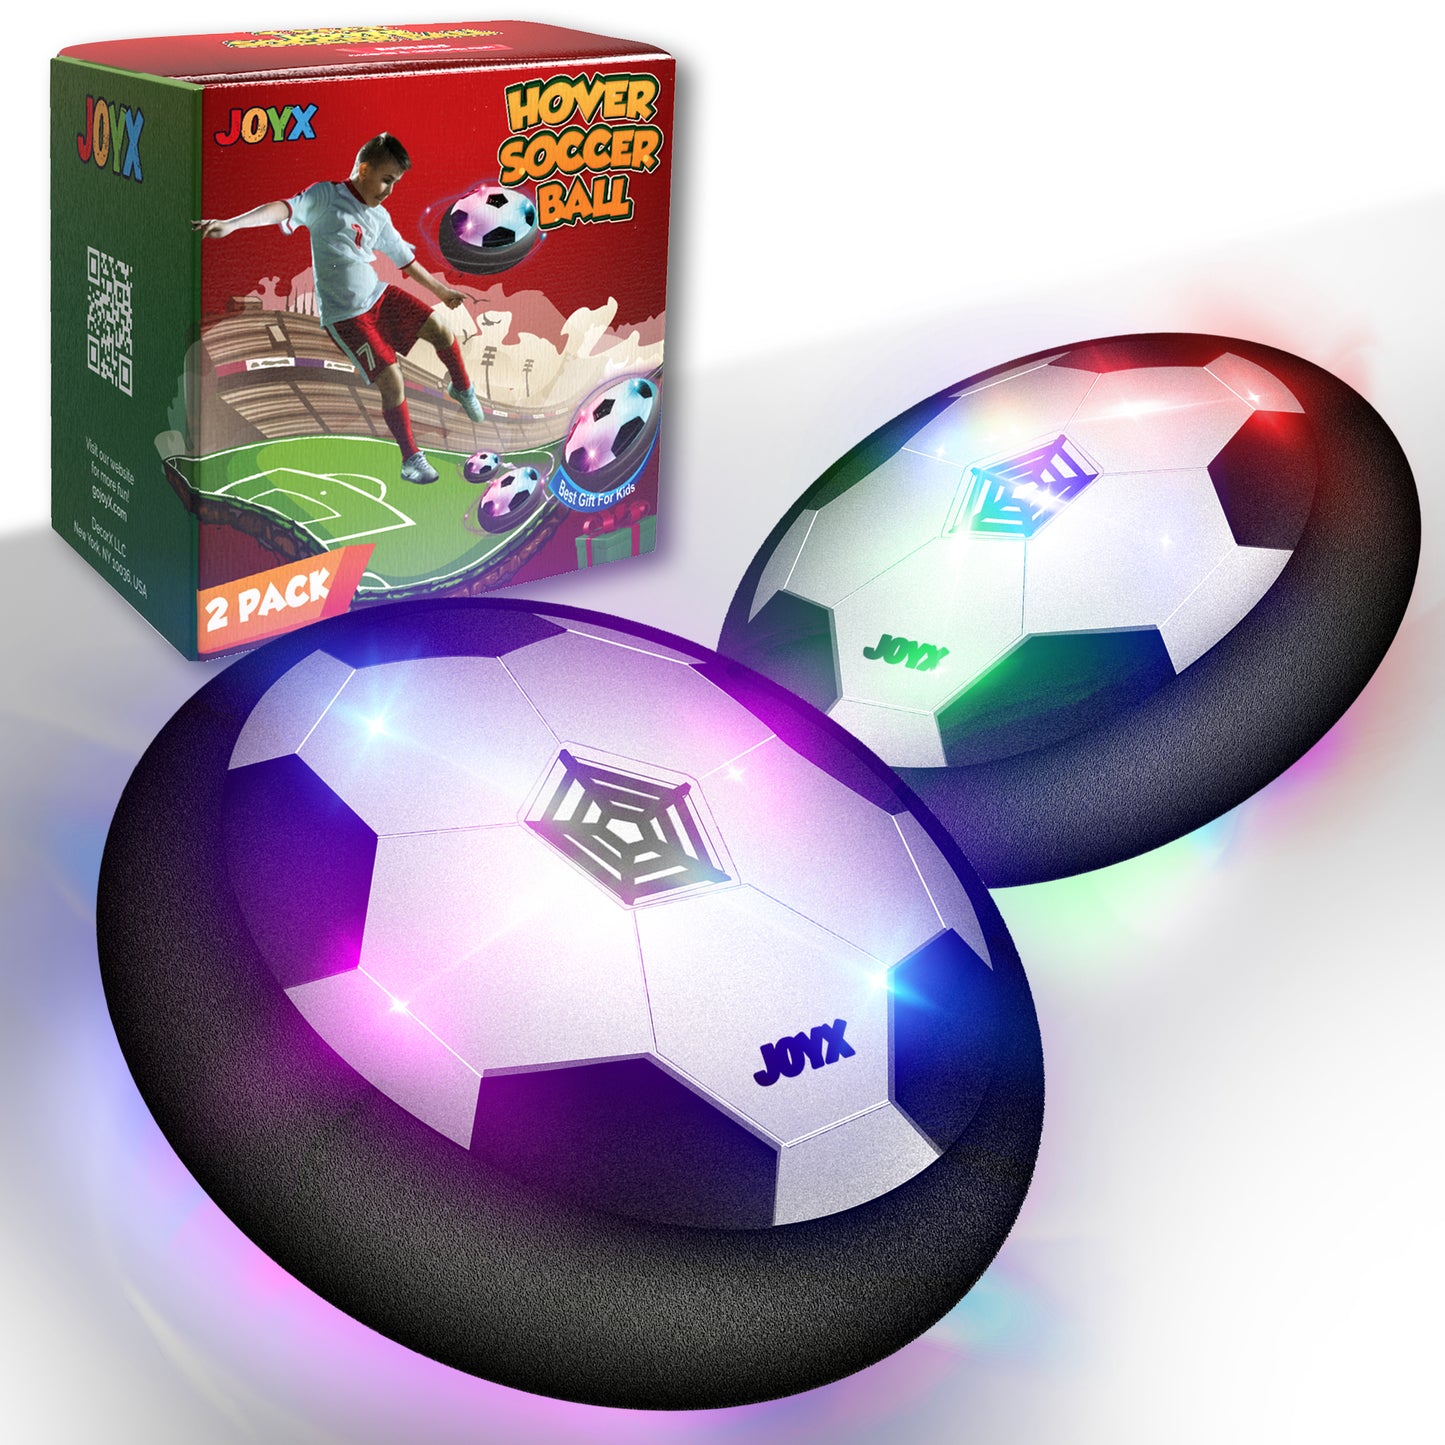 Hover soccer ball toy with packaging